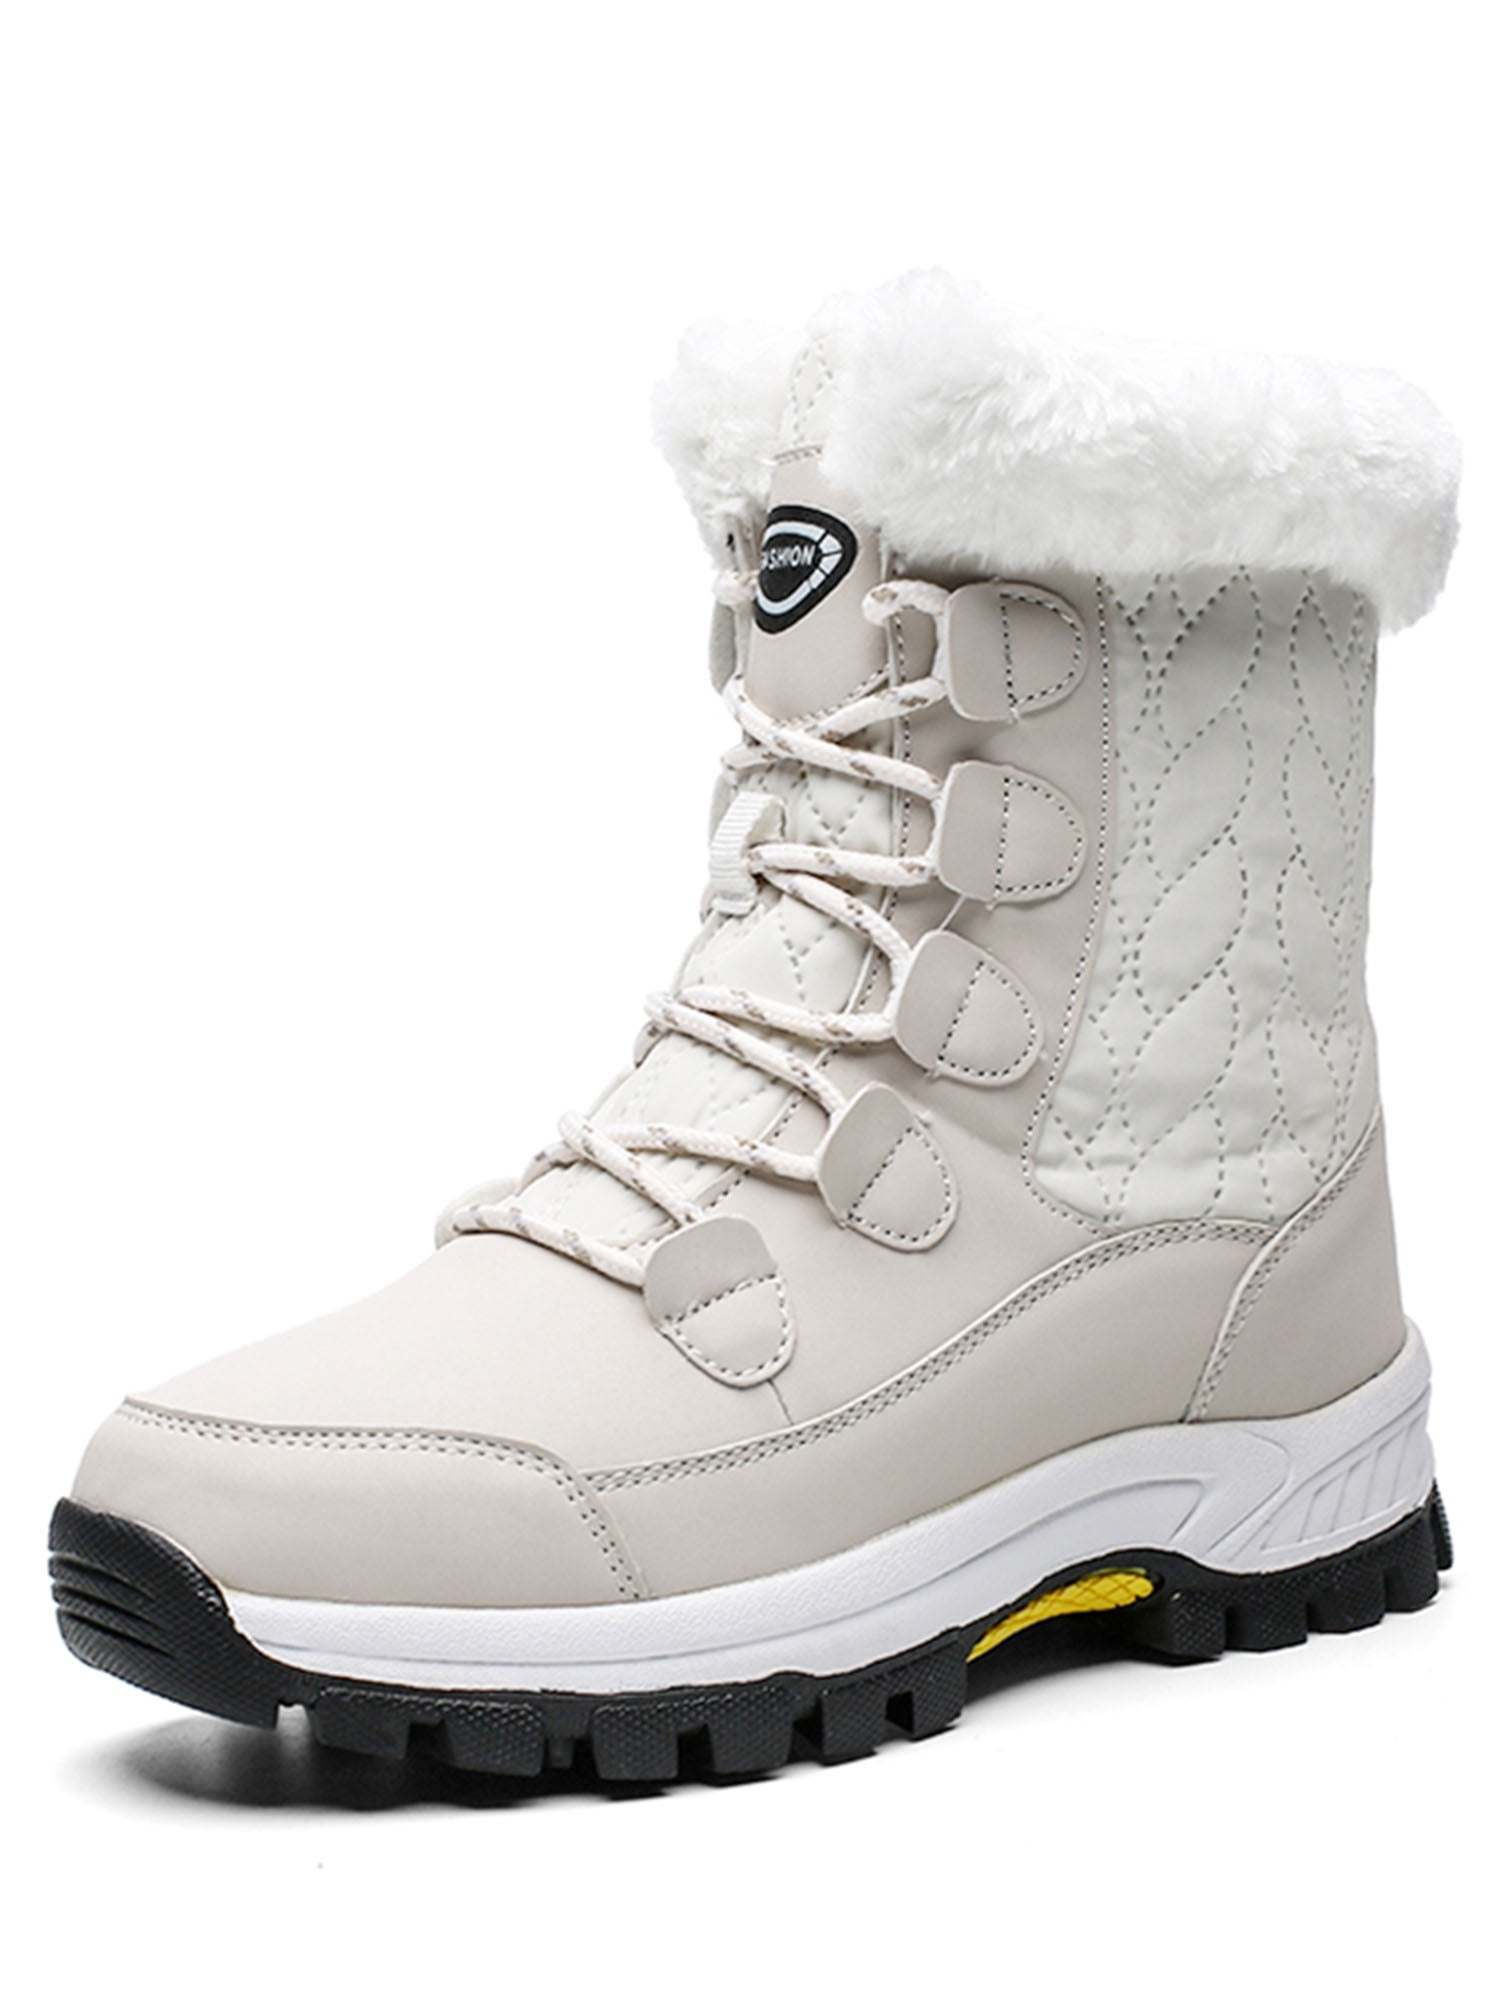 Jelly Beans Girls Youth Snow Boots /Water Resistance/ Mid Calf Size 